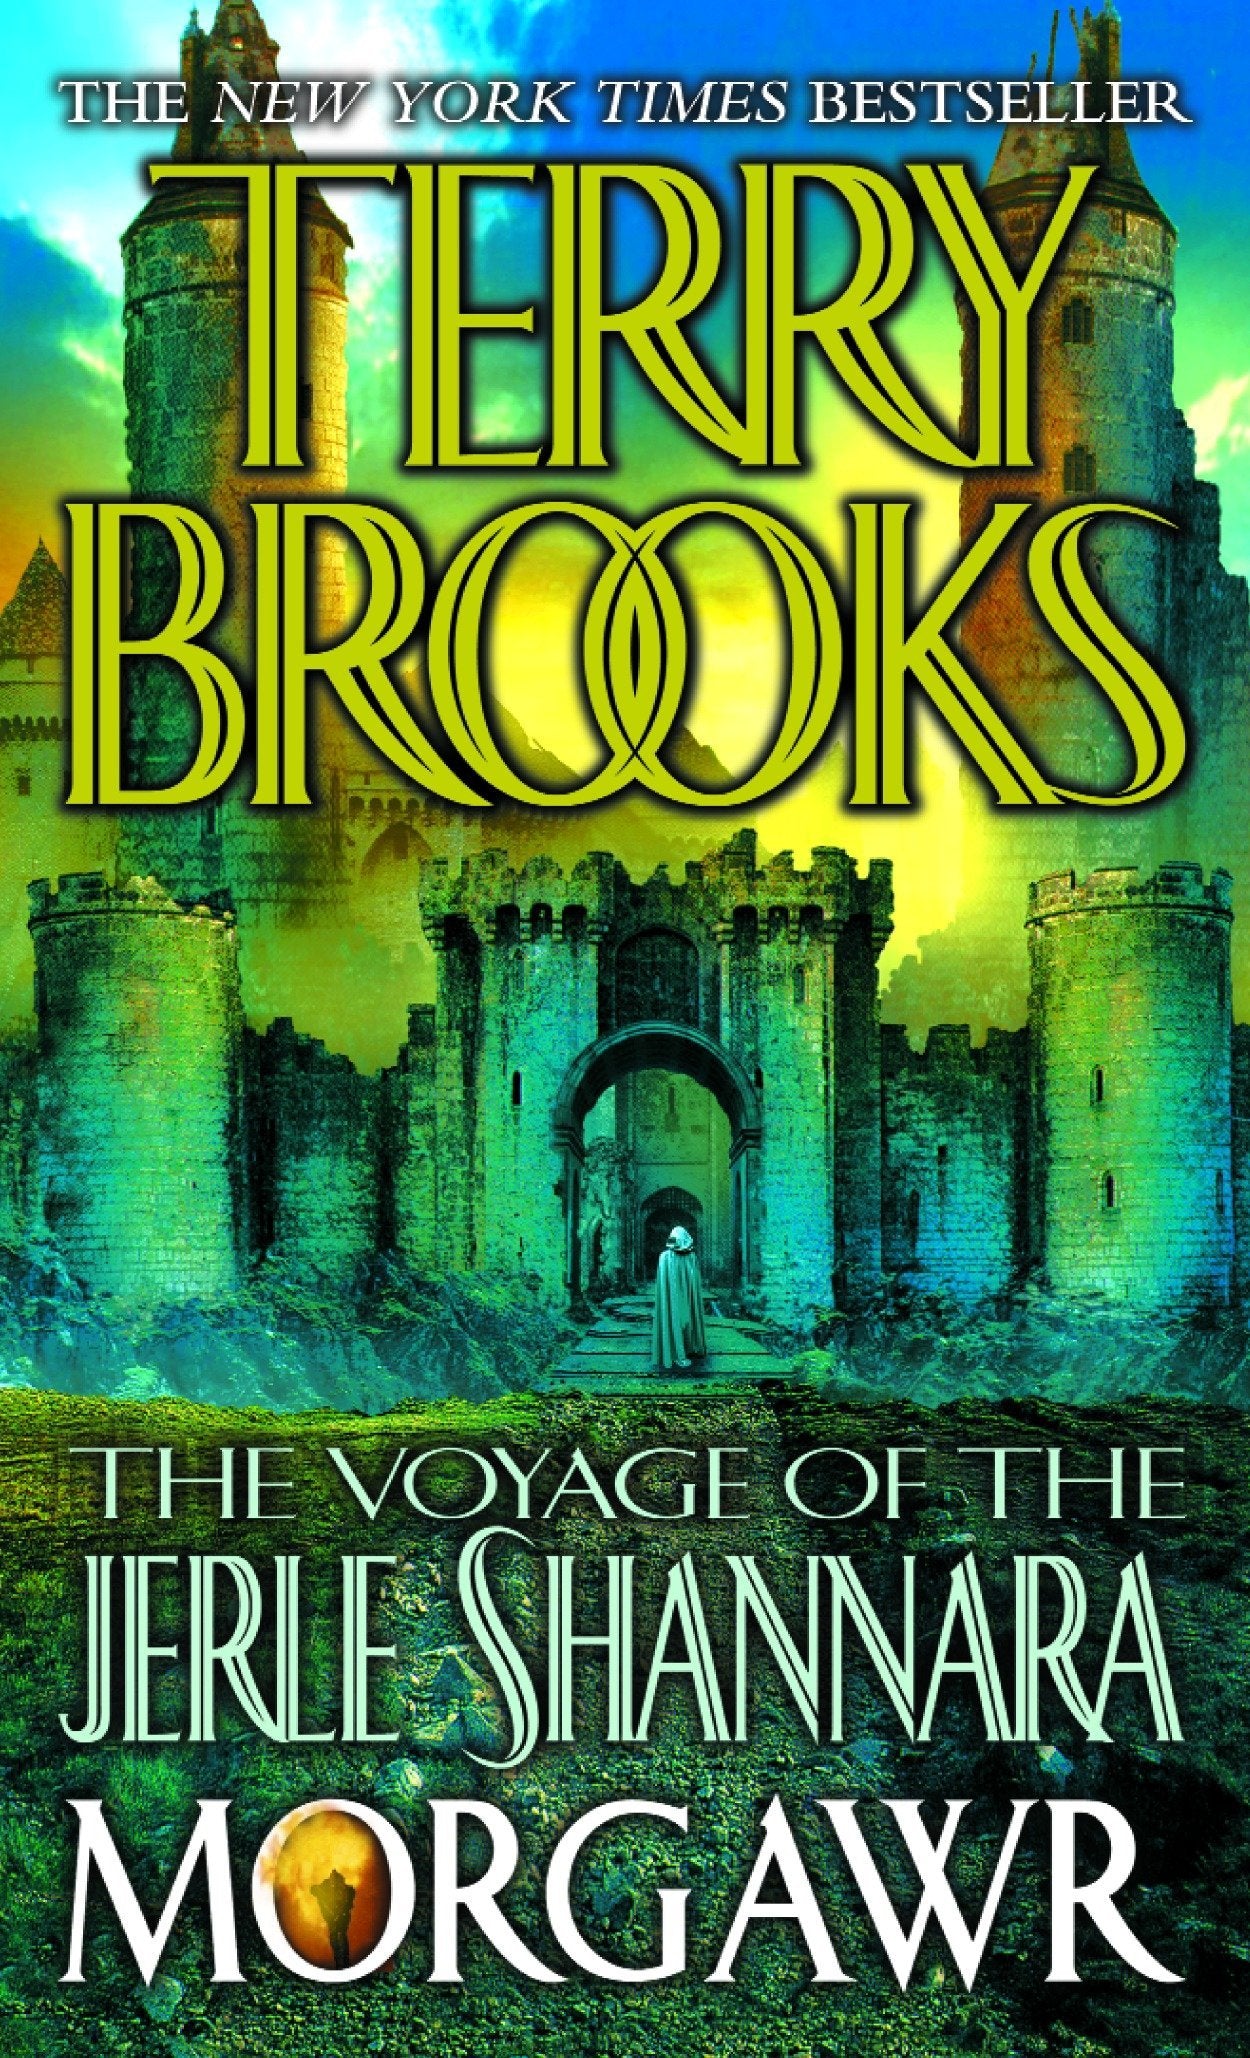 Livre ISBN 0345435753 The Voyage of the Jerle Shannara: Morgawr (Terry Brooks)